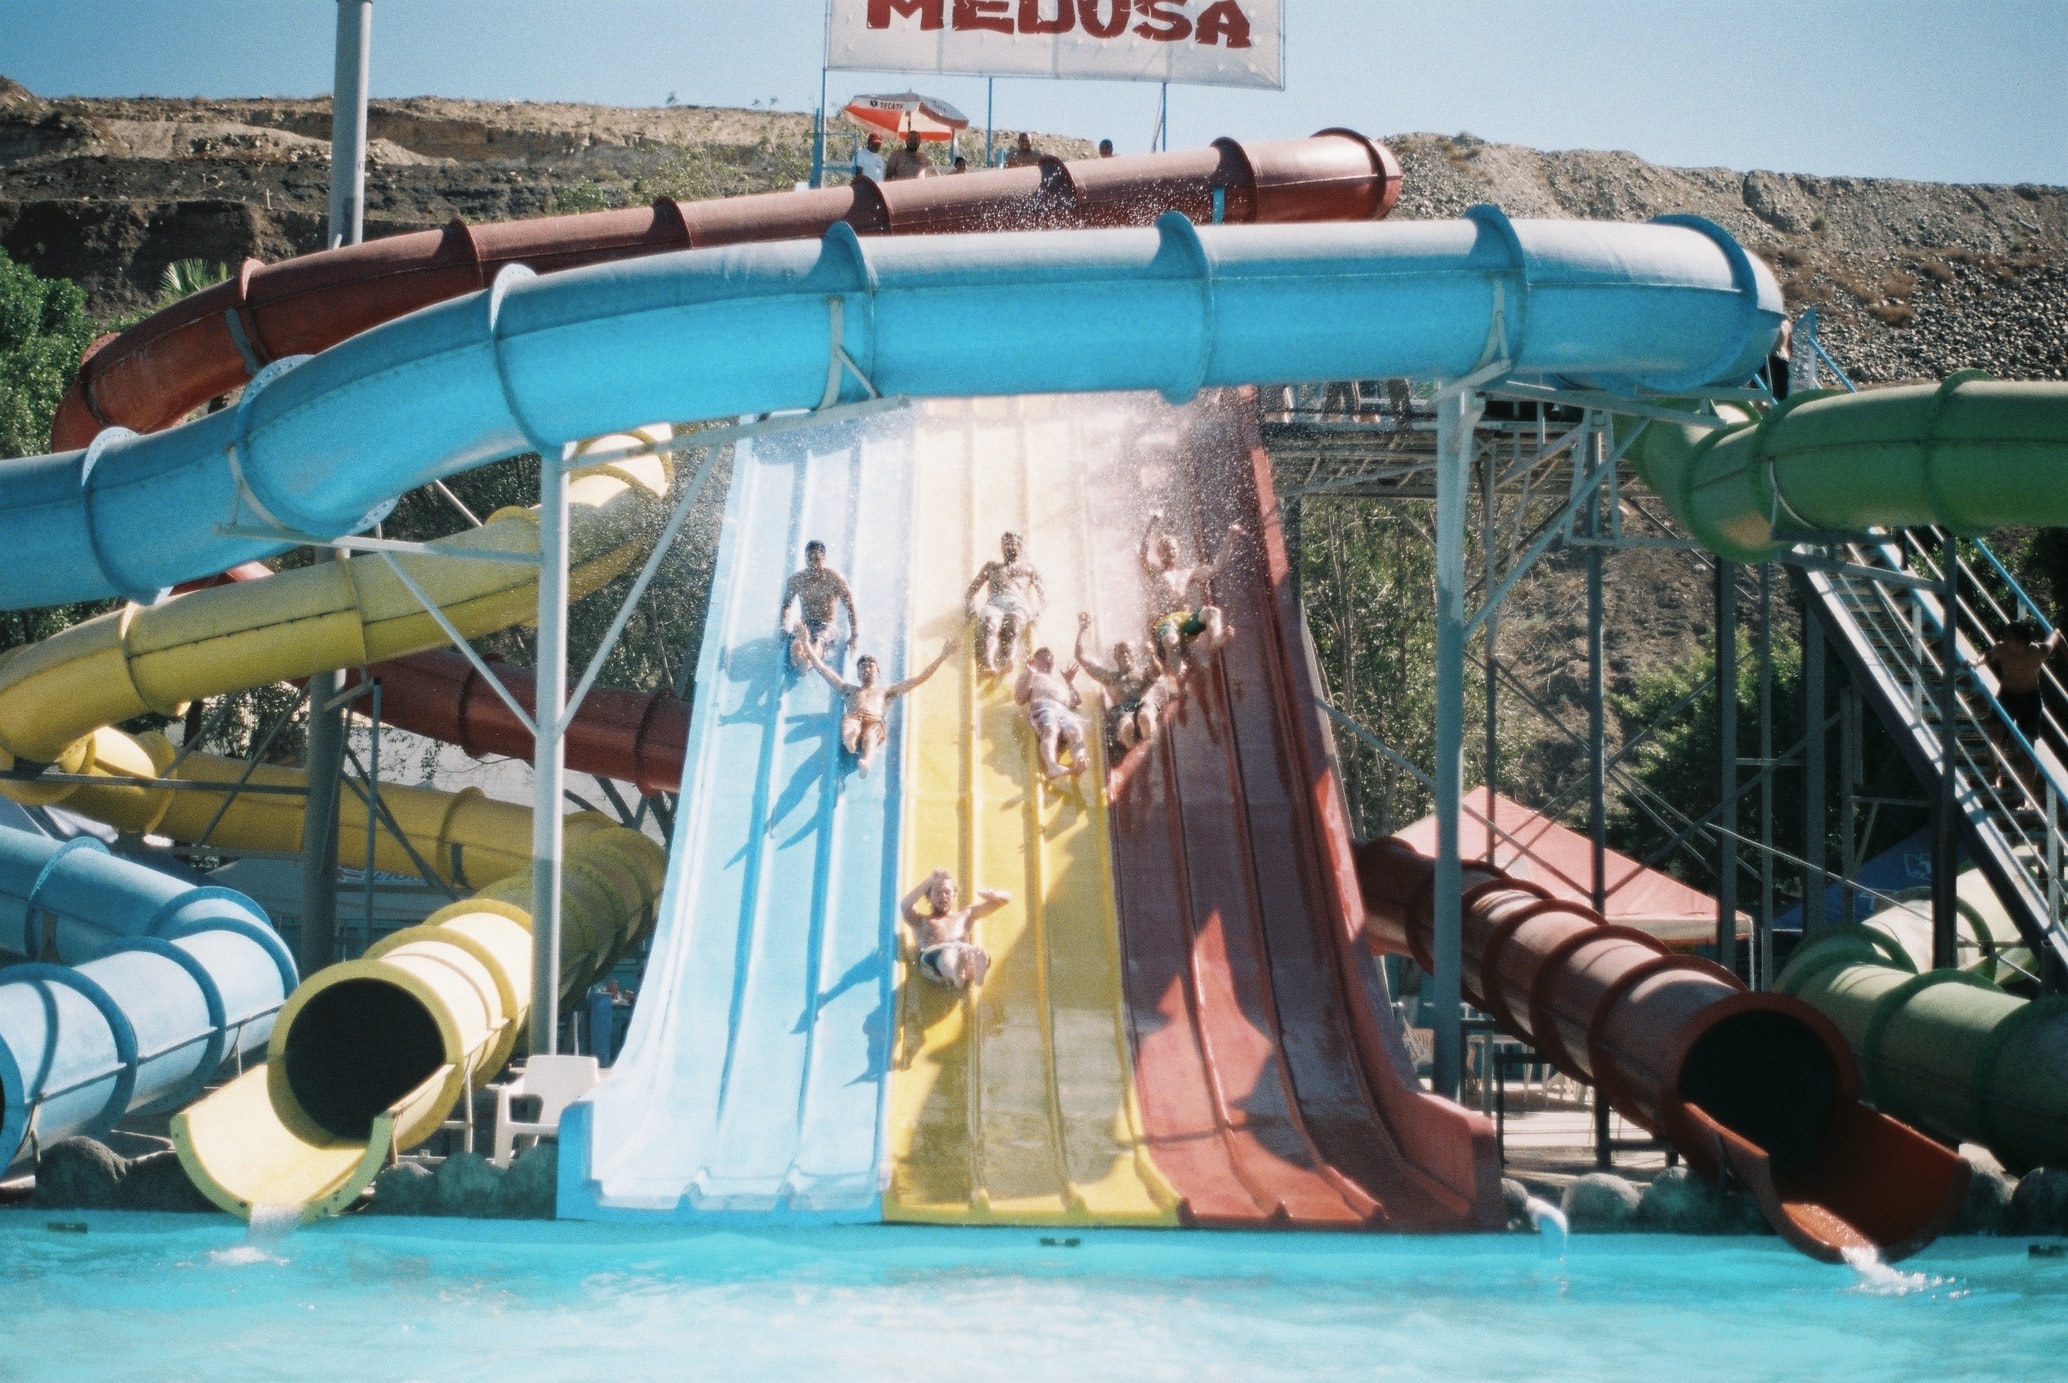 group of people going down a water slide at a water park